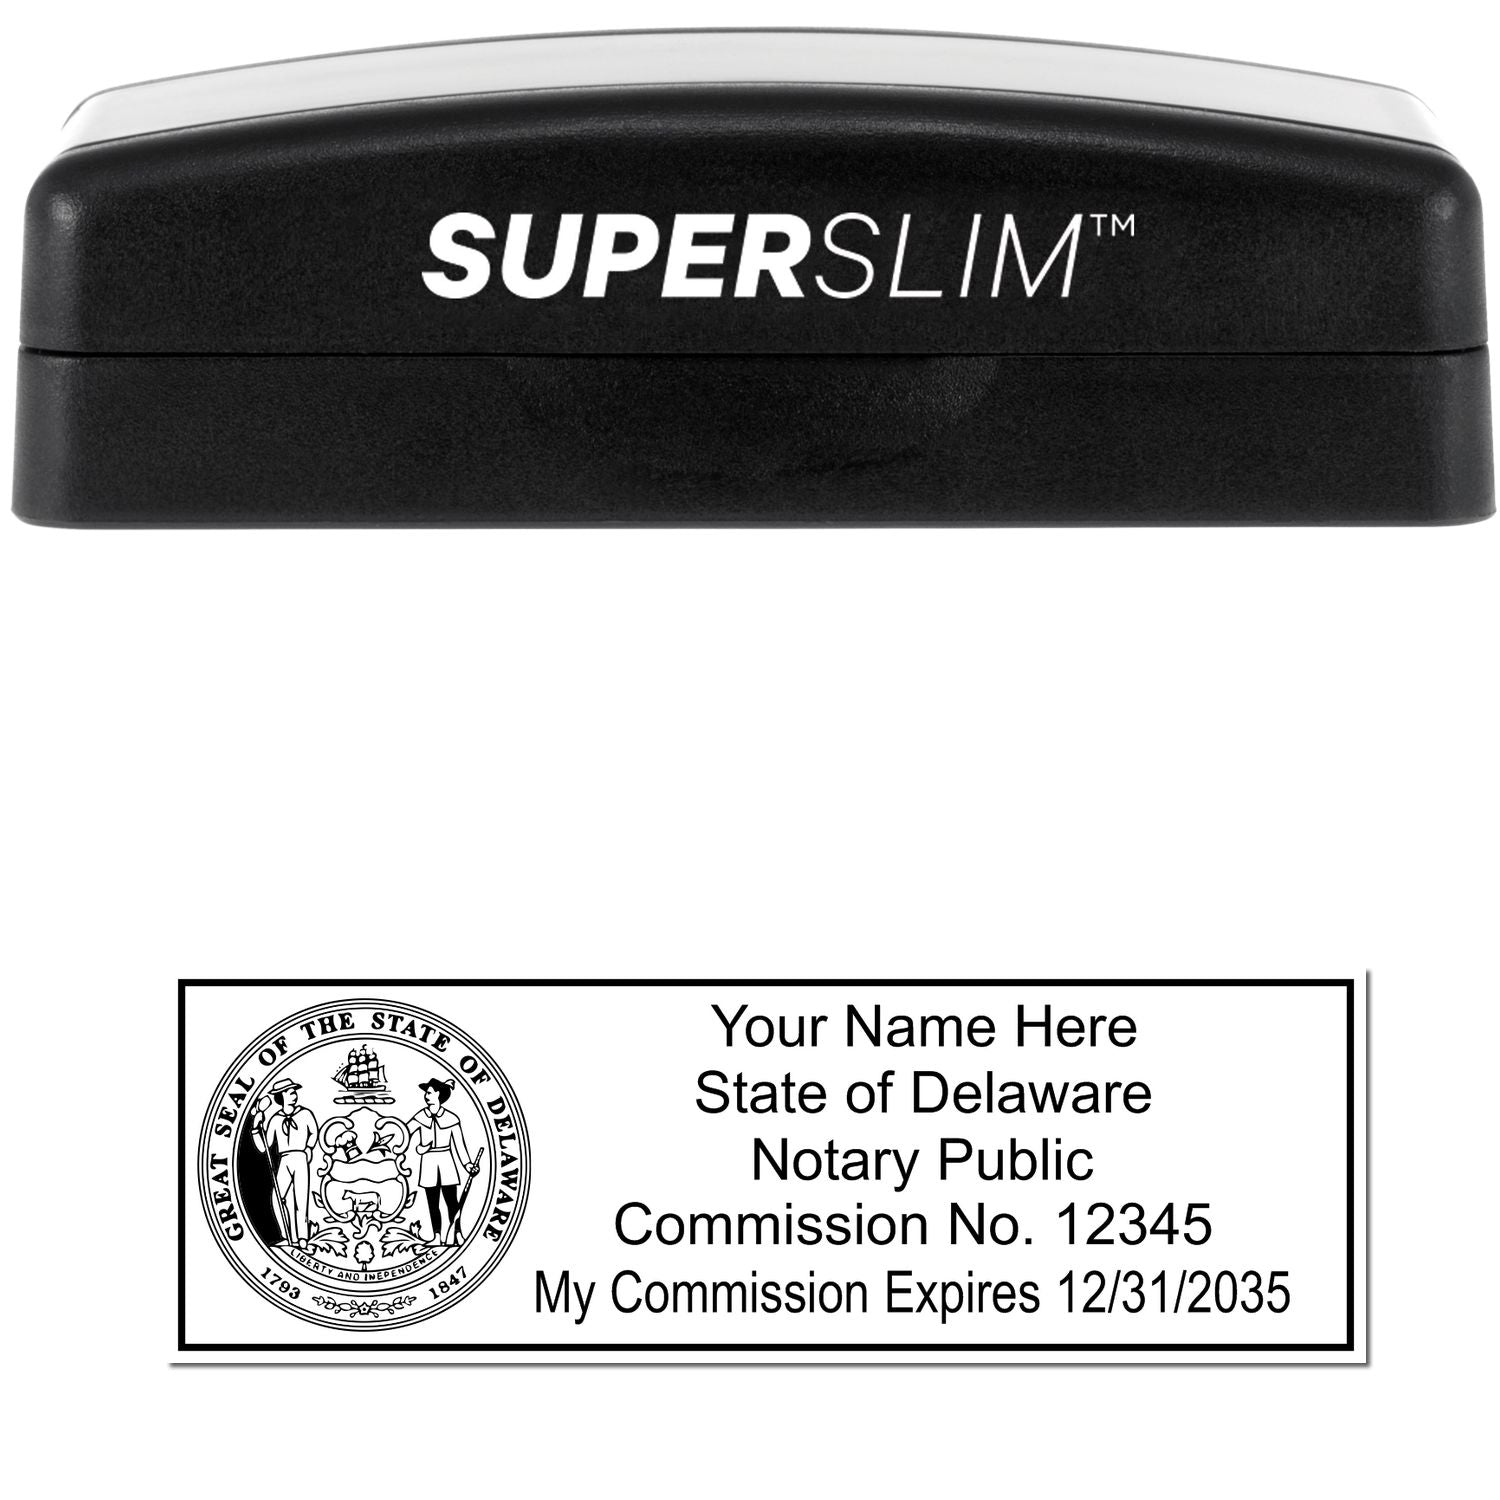 The main image for the Super Slim Delaware Notary Public Stamp depicting a sample of the imprint and electronic files